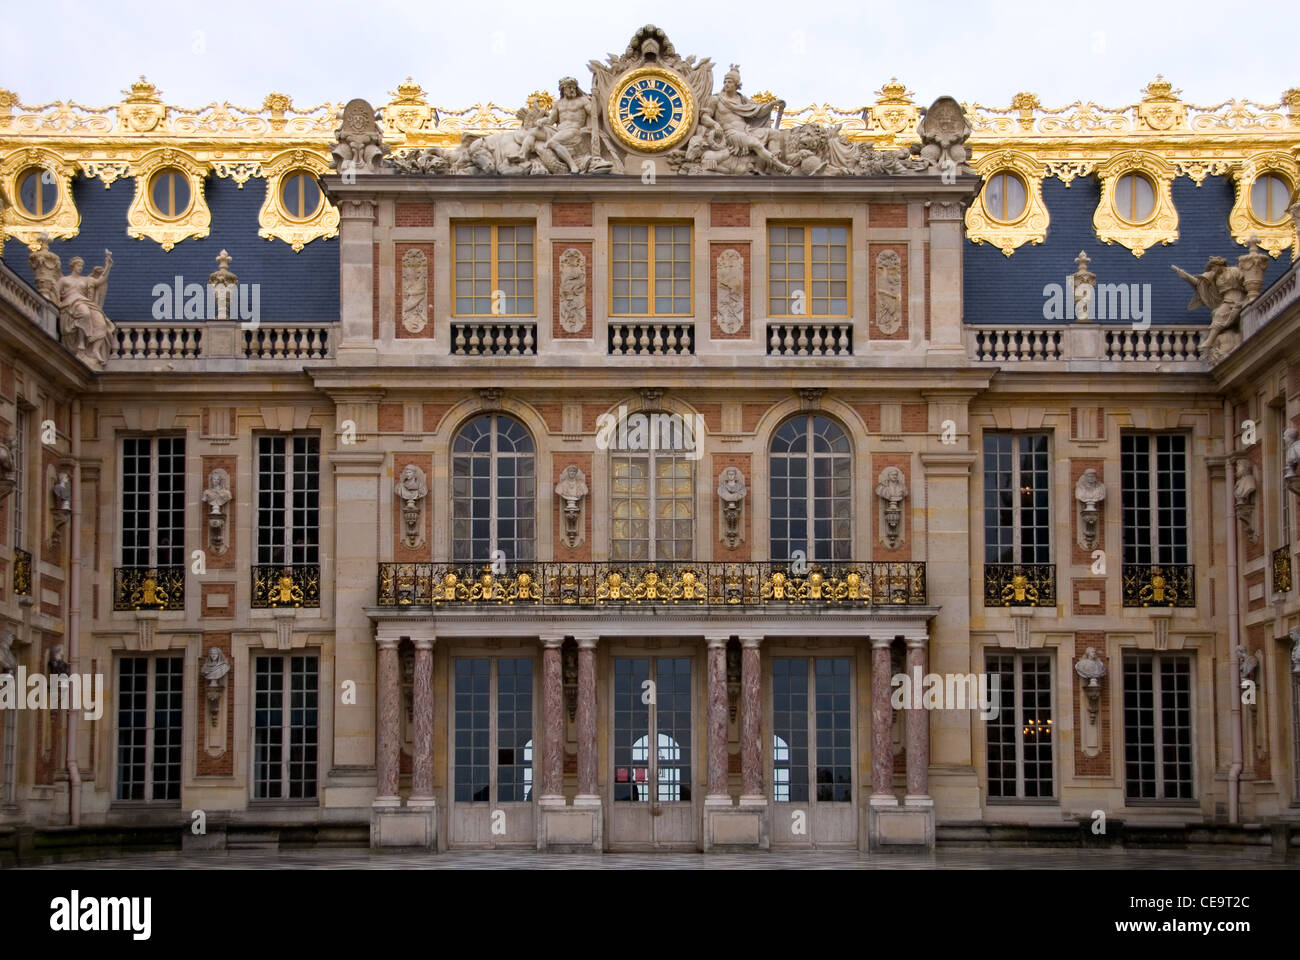 One of the facades of the Palace of Versailles, France Stock Photo